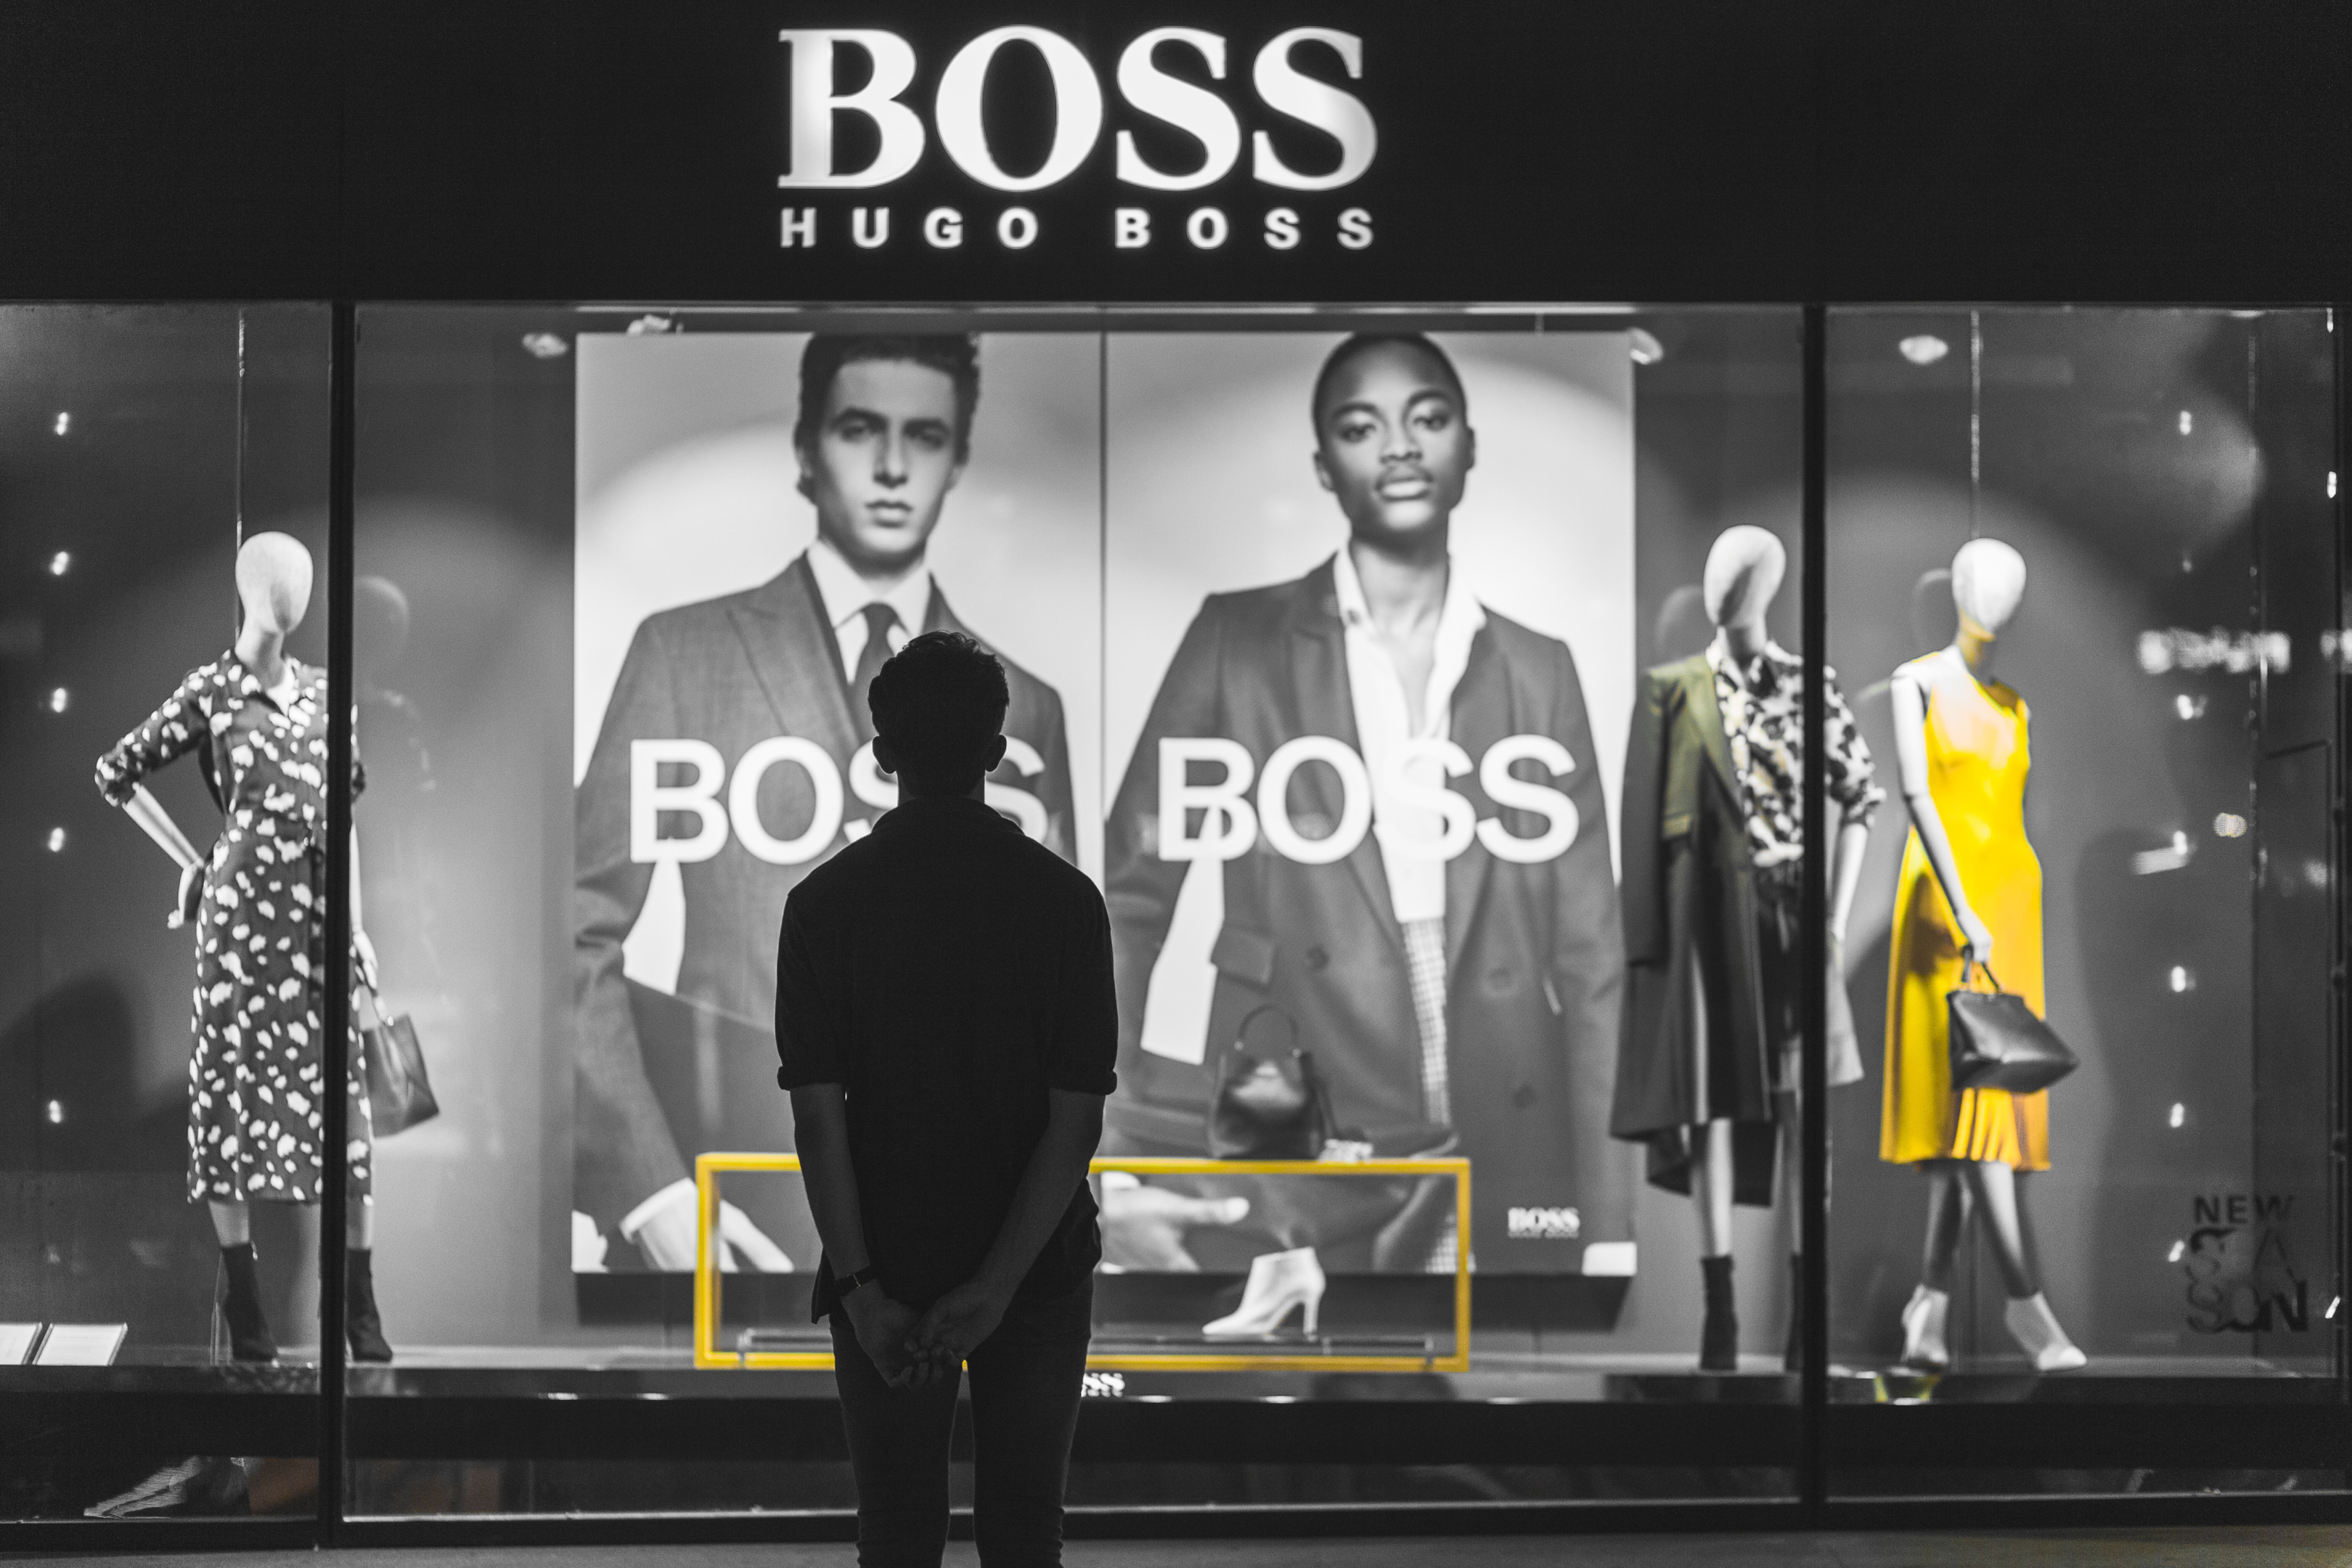 Hugo Boss is a German brand founded in 1924 | Photo by Jules D. from Unsplash